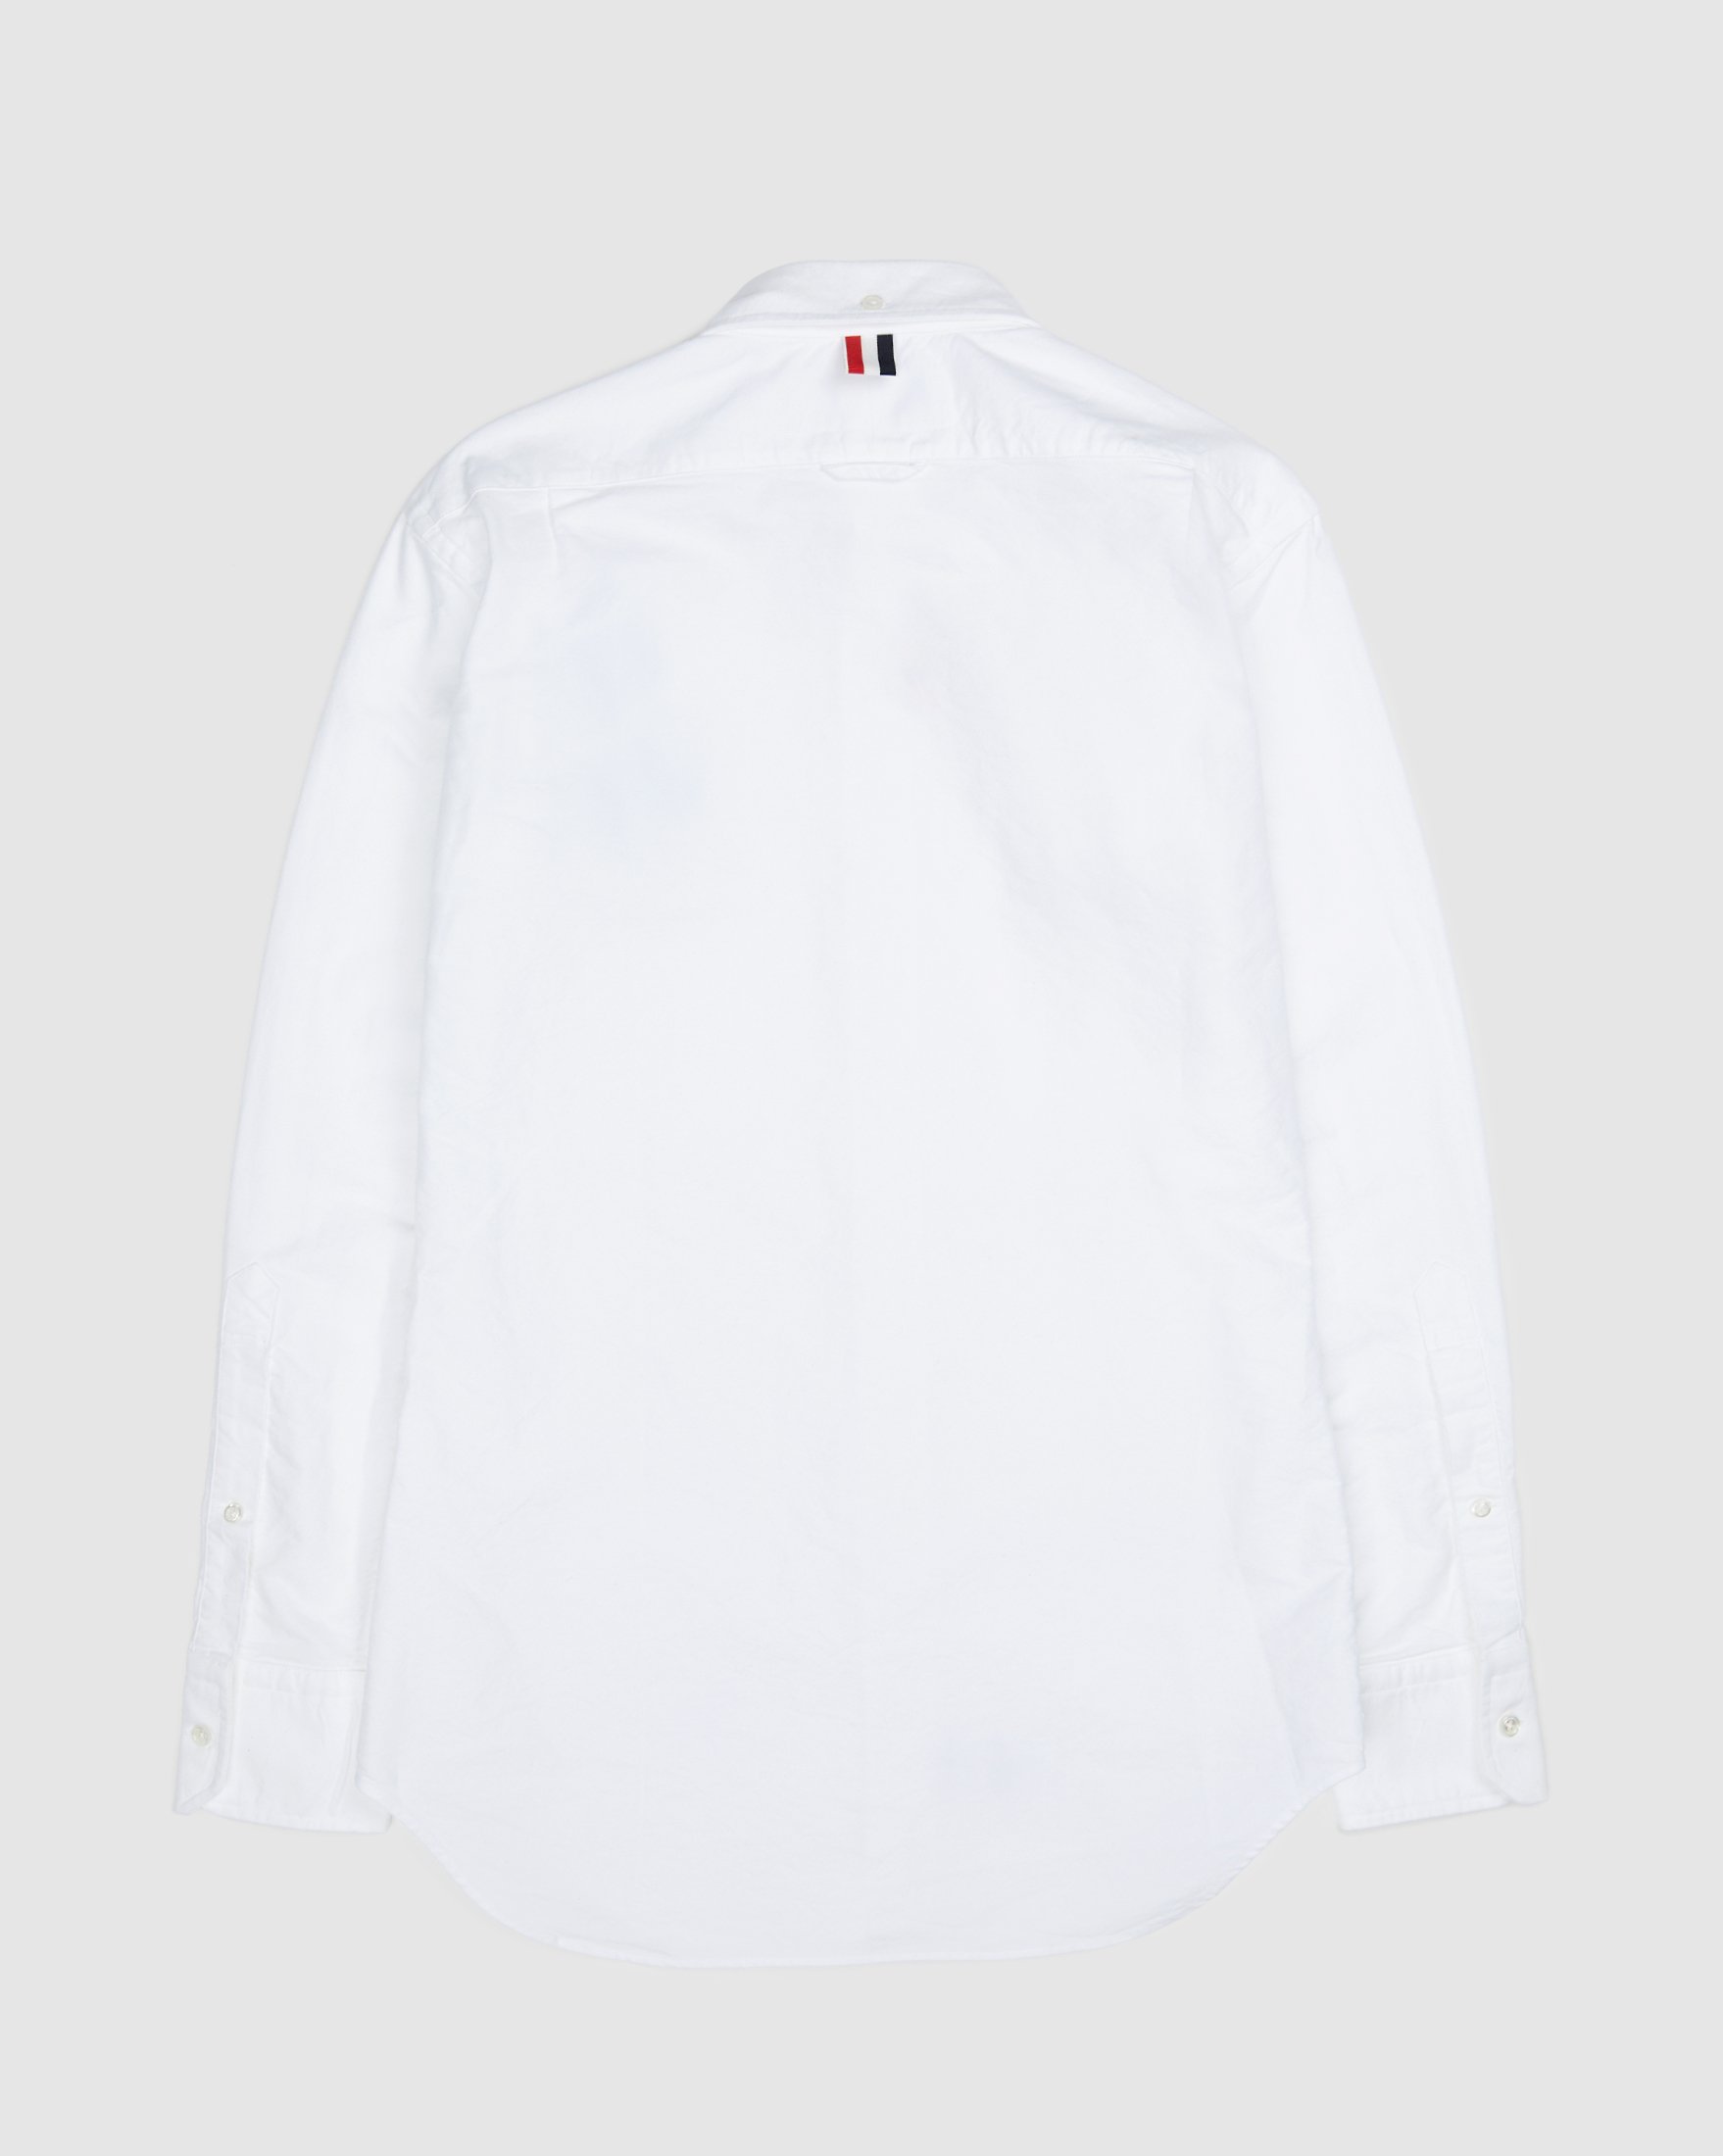 Colette Mon Amour x Thom Browne - White Peace Classic Shirt - Clothing - White - Image 2